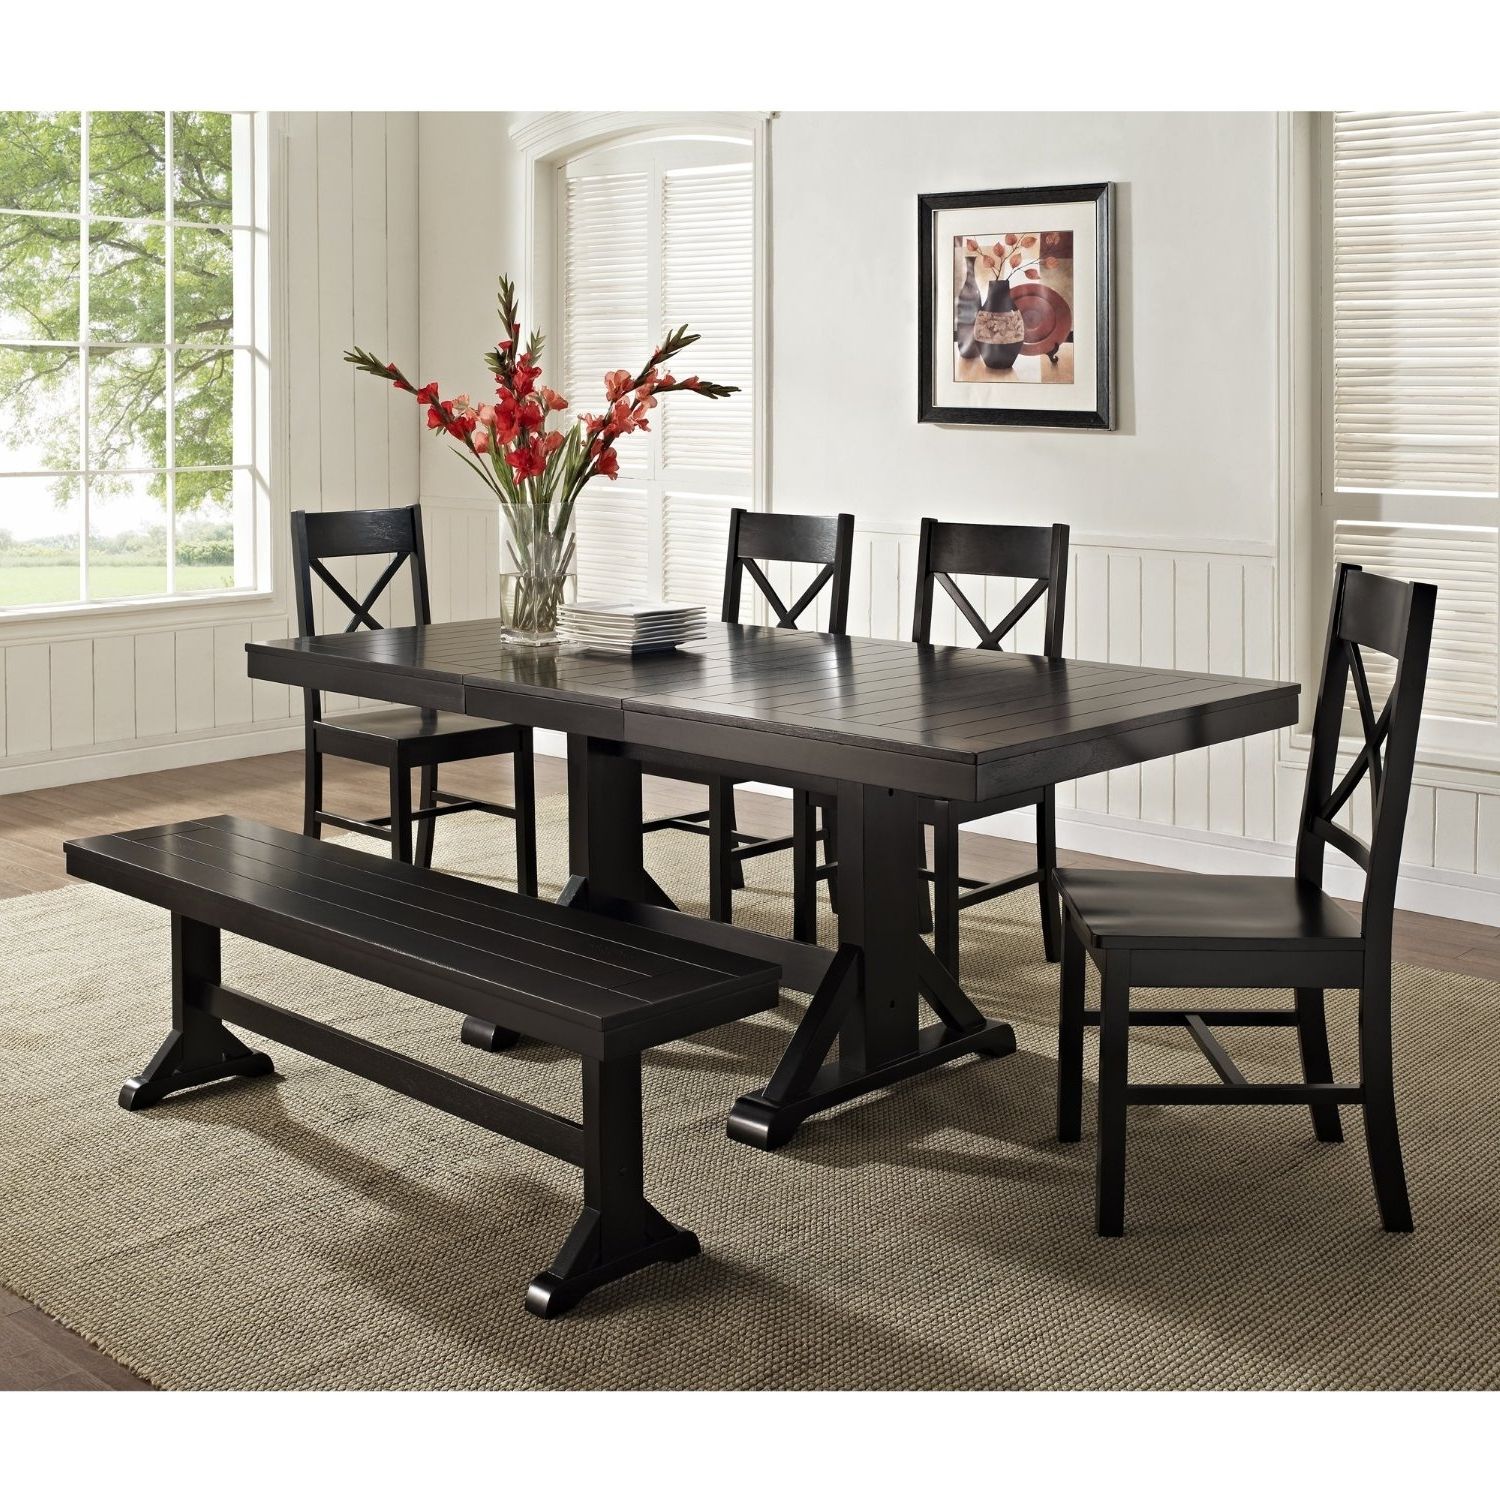 Recent Dining Set With Bench With Back In Top Bench Tablesets At Hayneedle With Regard To Jaxon 6 Piece Rectangle Dining Sets With Bench & Wood Chairs (View 23 of 25)